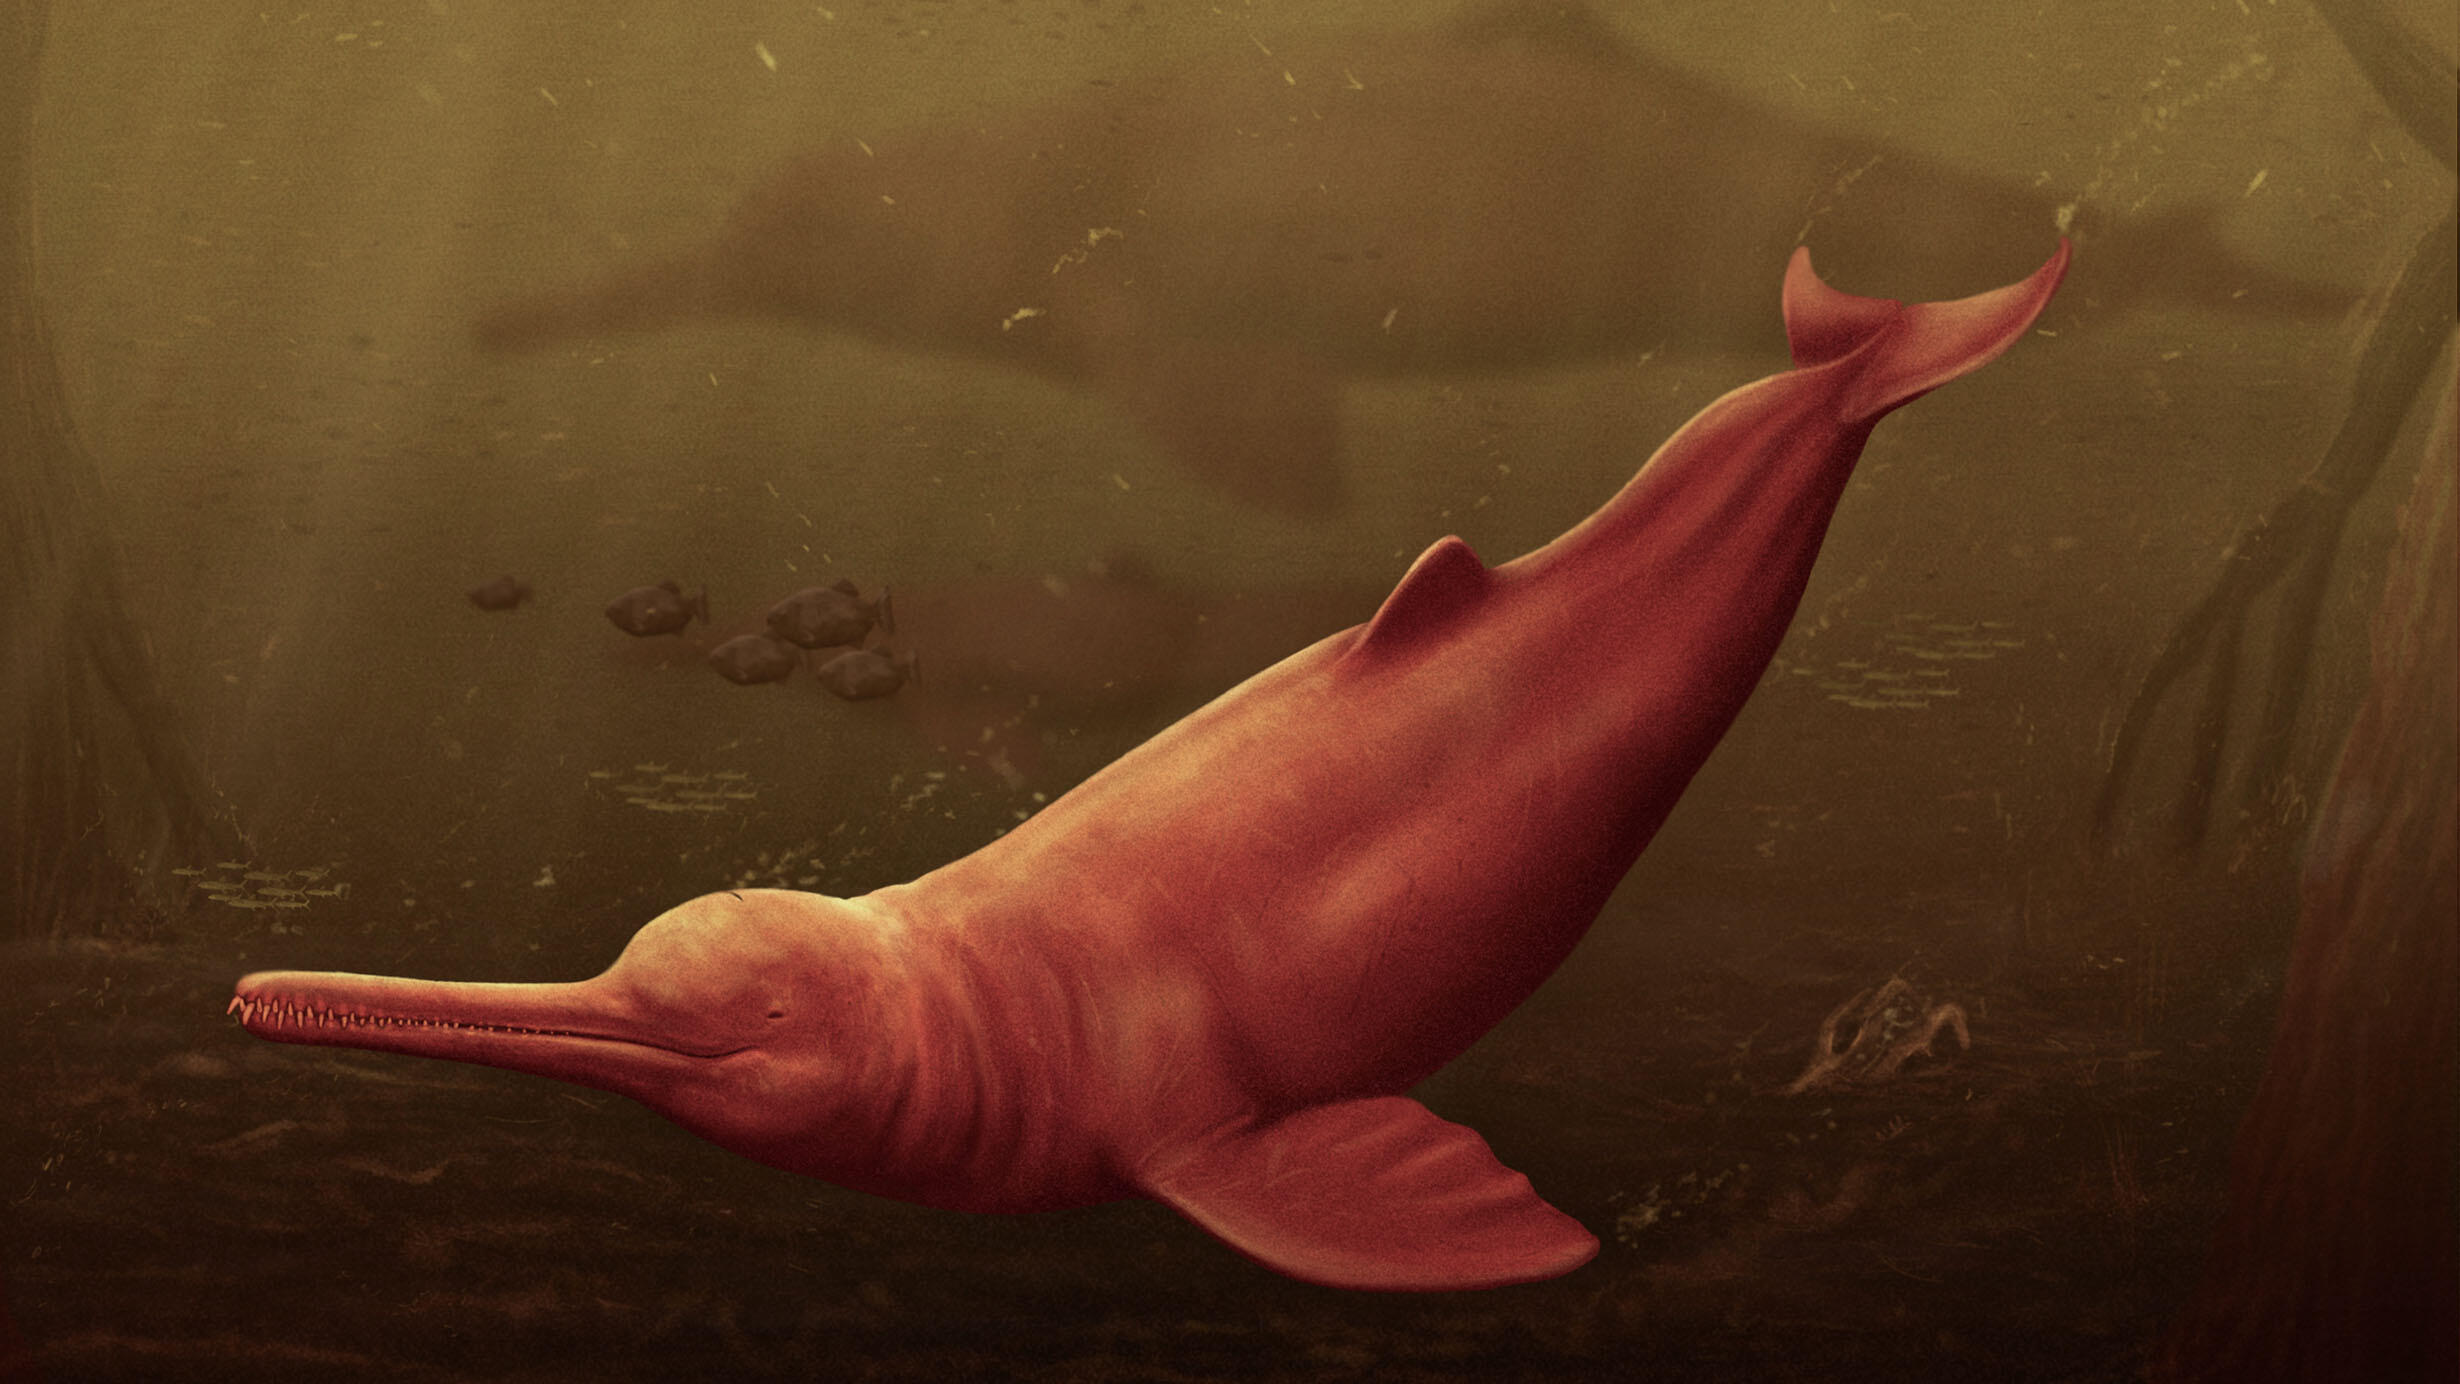 Artist's rendering of an ancient freshwater dolphin with a long snout in murky waters, with other creatures in the background.